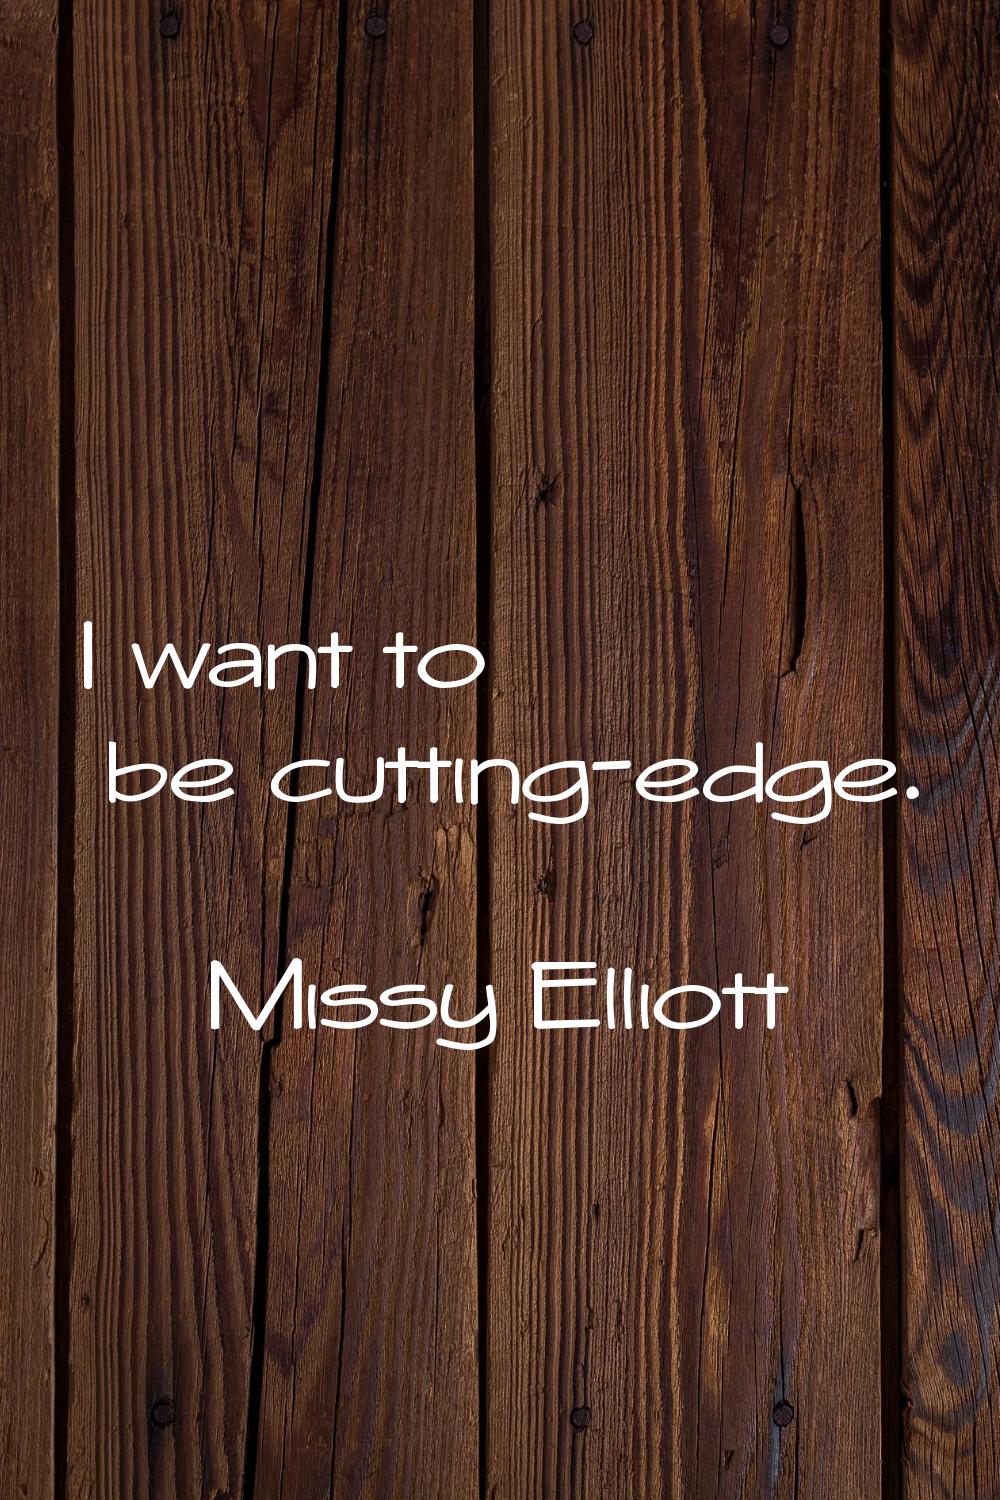 I want to be cutting-edge.